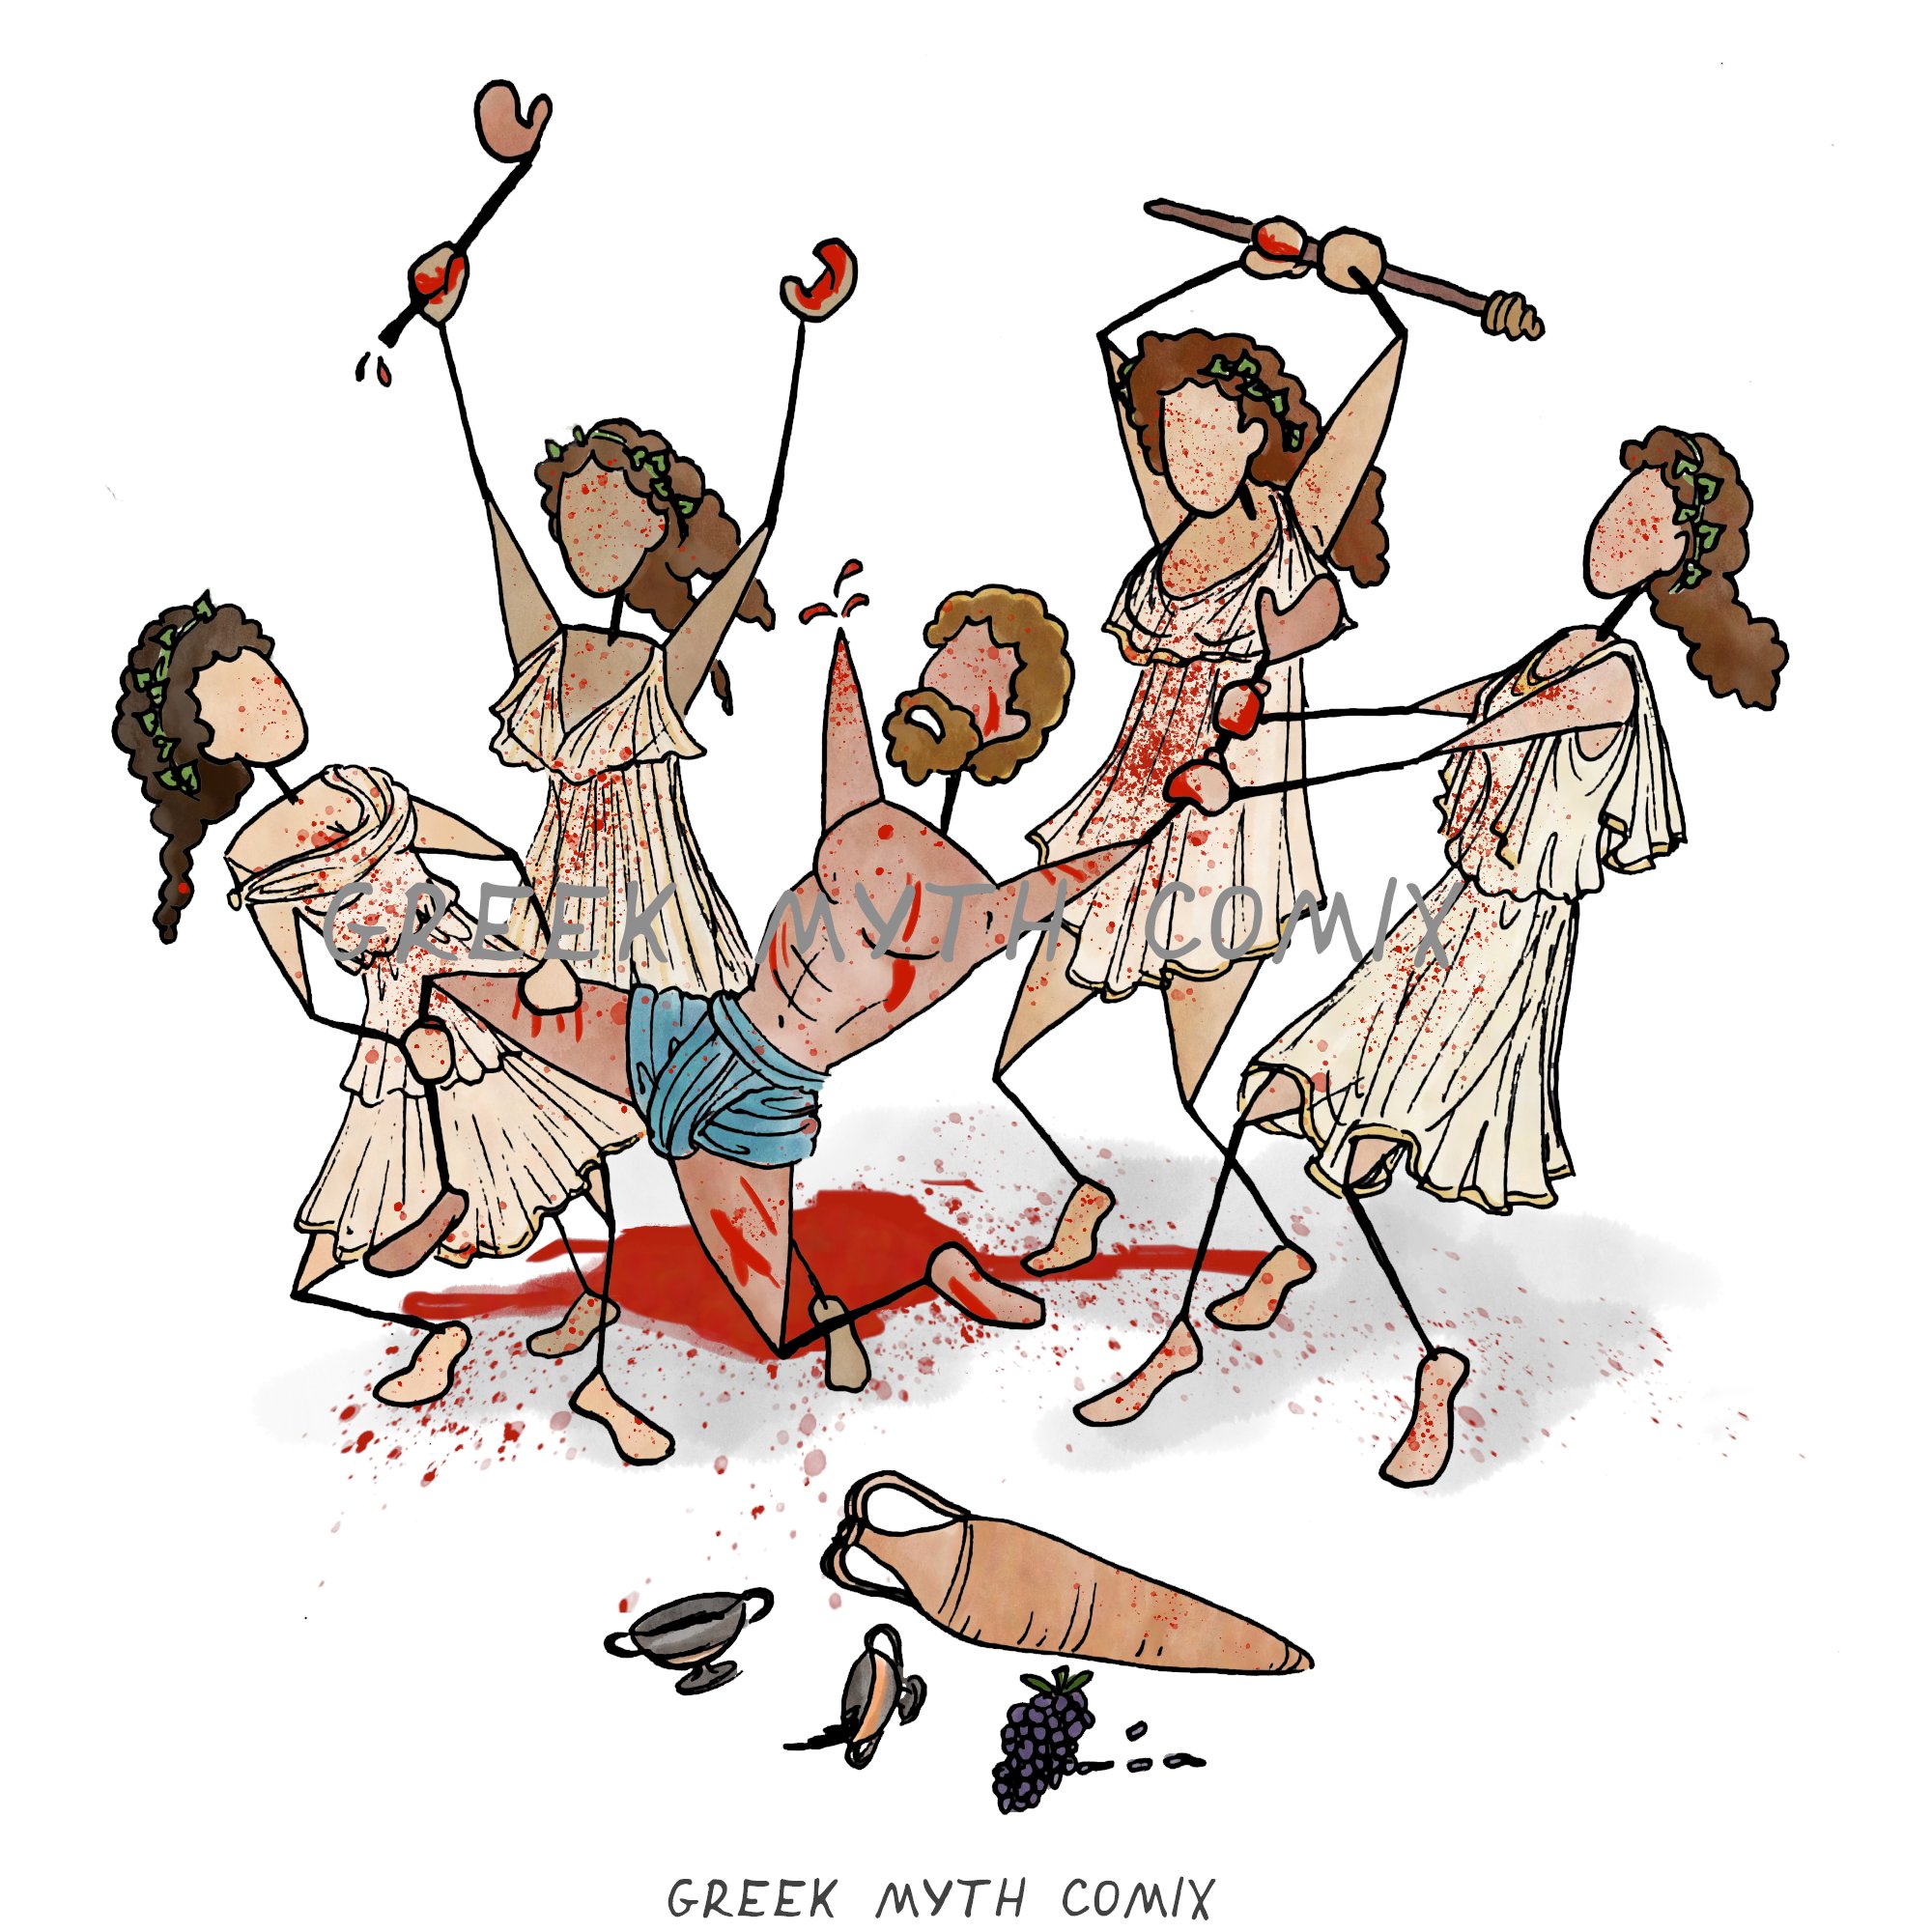 A picture of a group of maenads tearing apart some poor chat, probably Orpheus, with wine drinking paraphernalia in front of them. One of them has pulled the man's arm off. Blood is everywhere. 